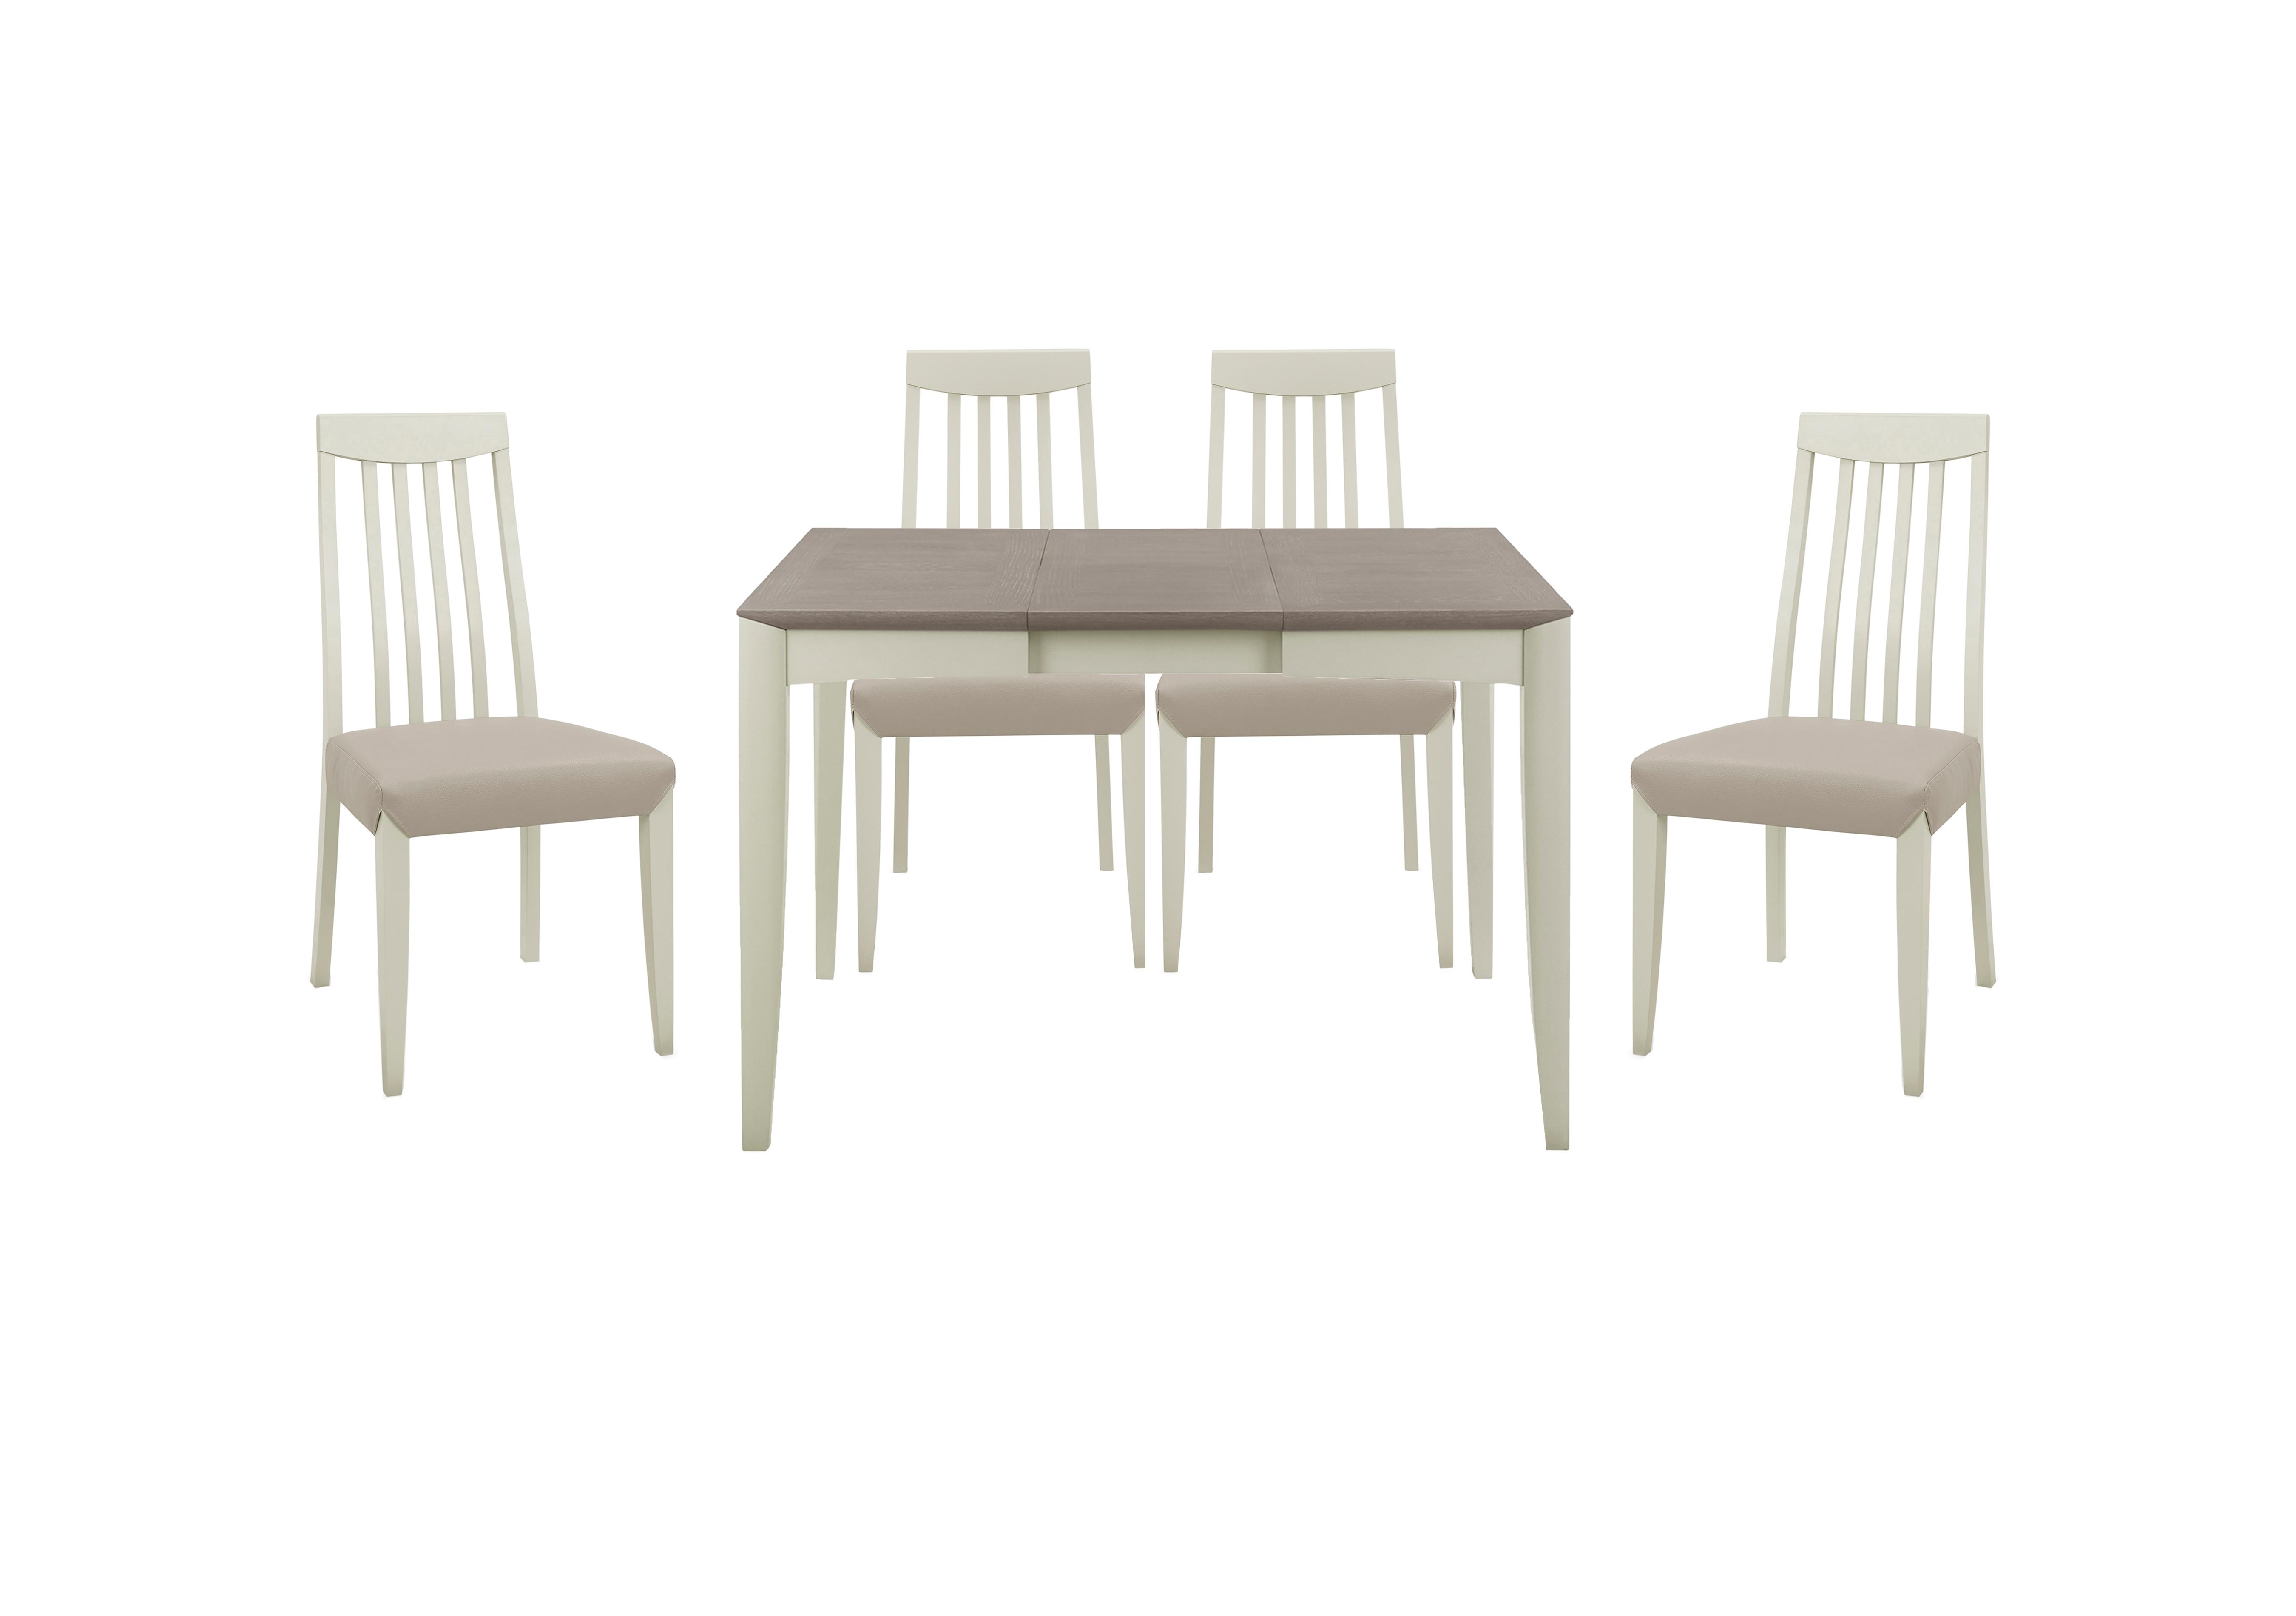 Skye Small Table and 4 Tall Chairs in Two Tone/Grey on Furniture Village